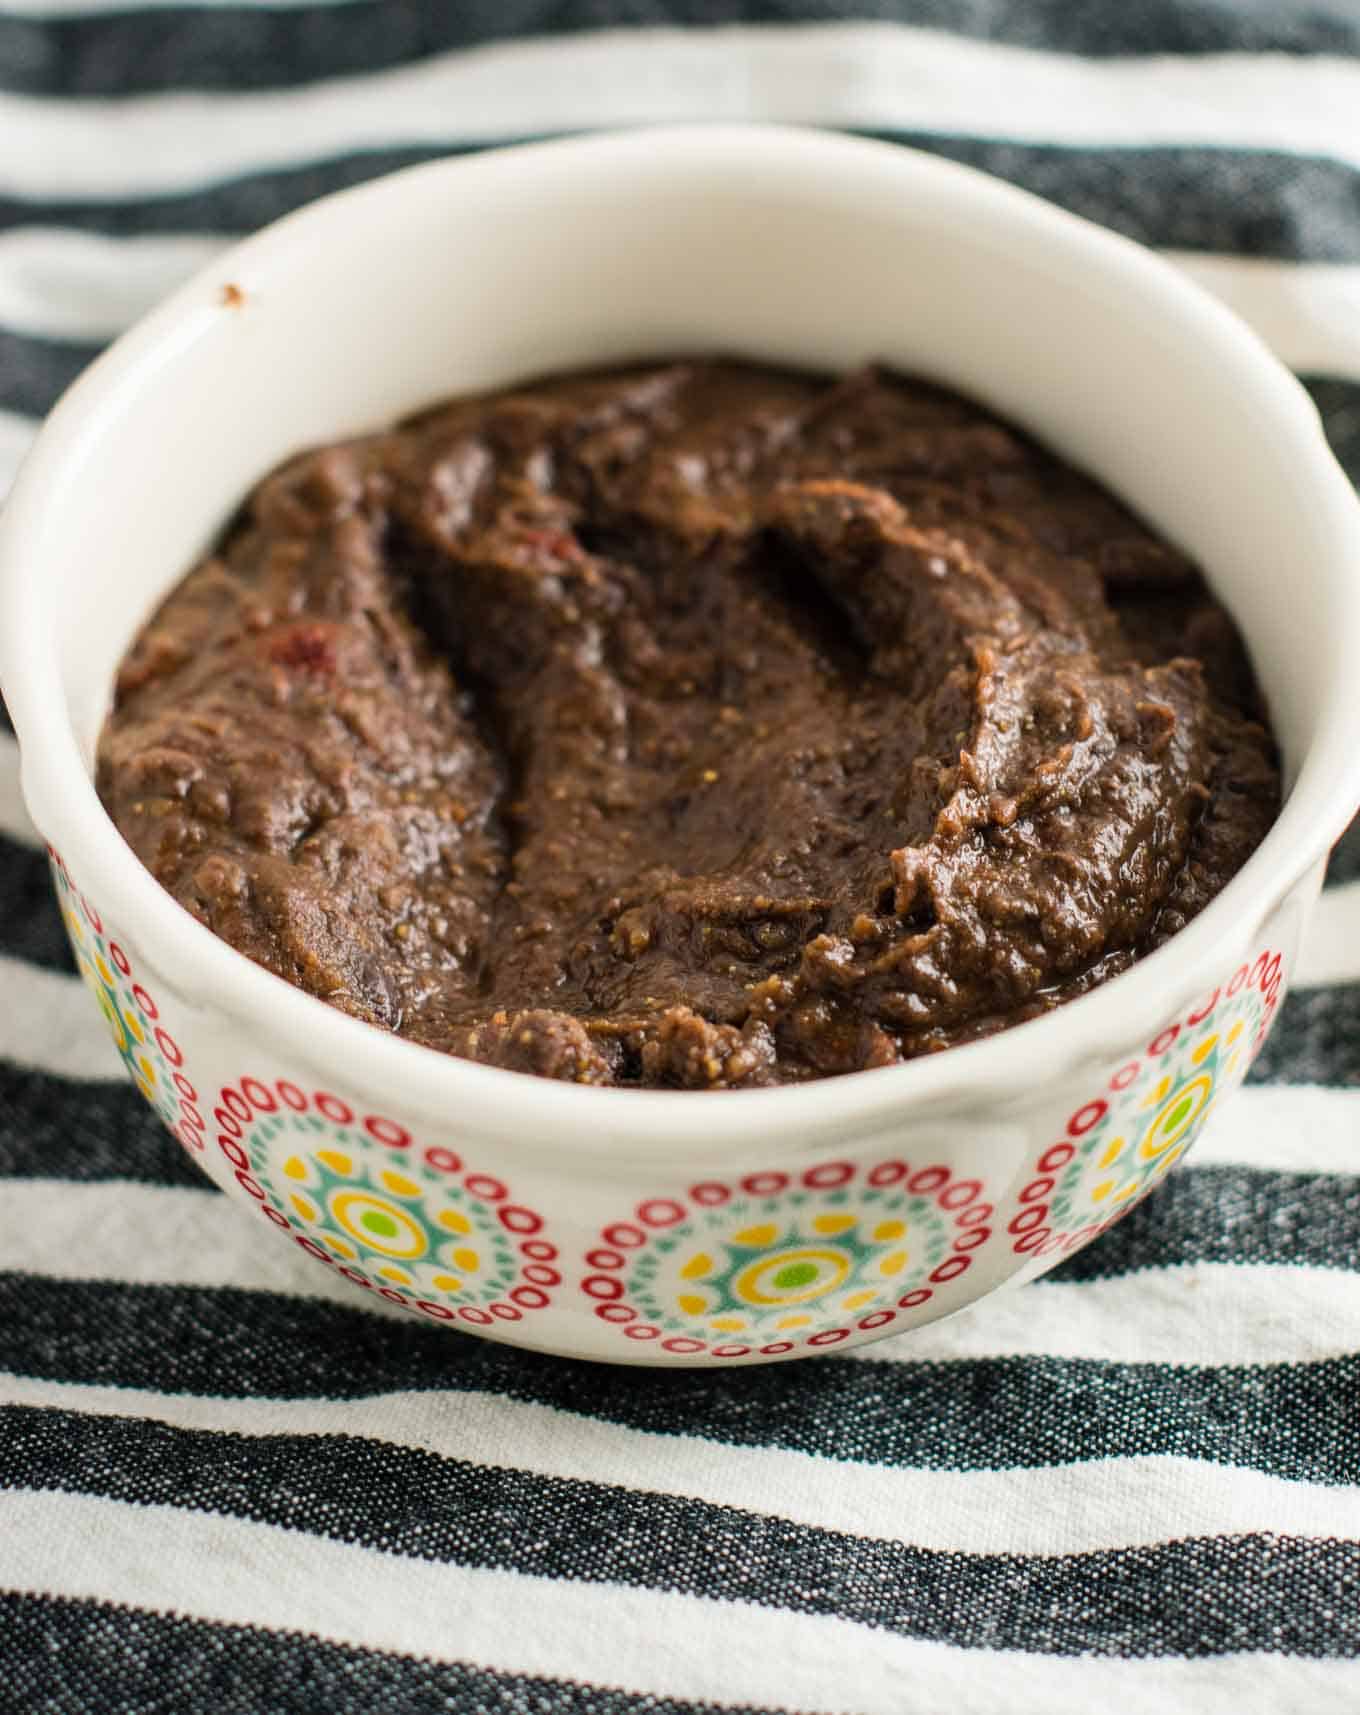 how to make homemade refried beans with just black beans a few spices. It only takes 5 minutes and tastes better than the canned stuff!